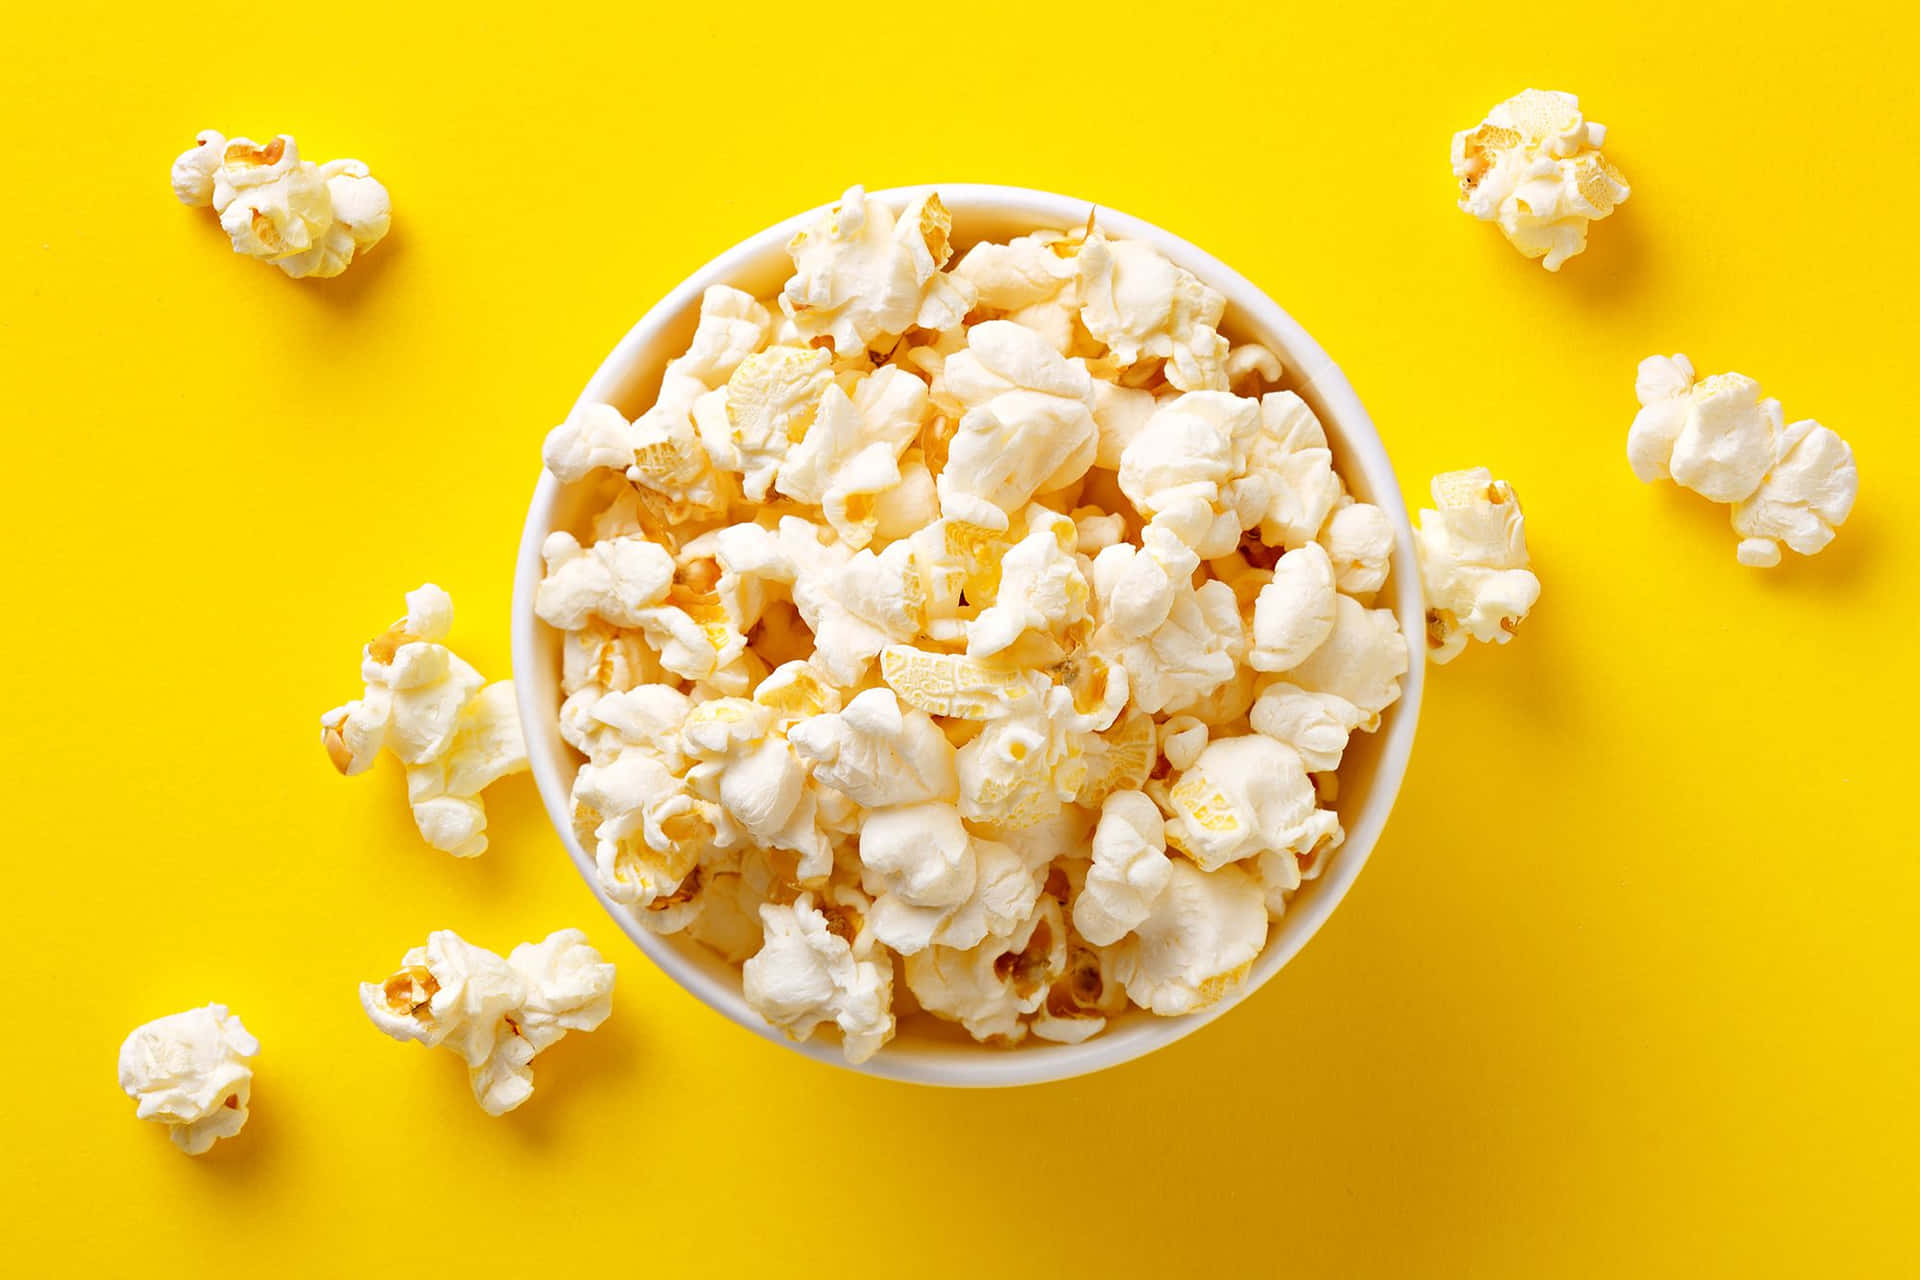 Popcorn On Yellow Surface Picture